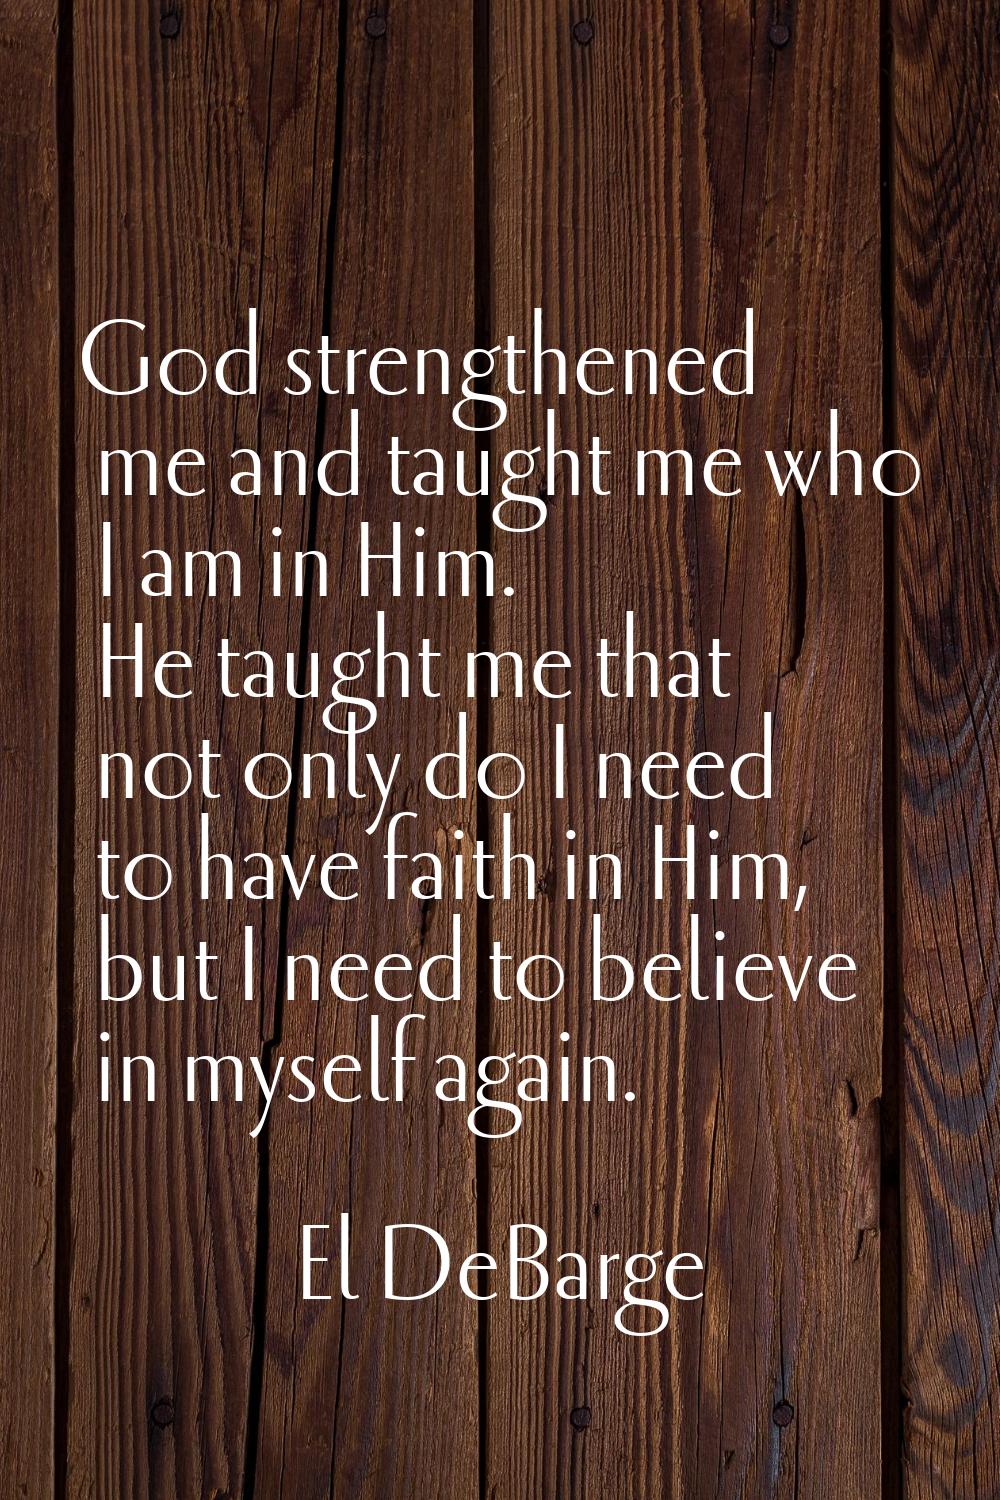 God strengthened me and taught me who I am in Him. He taught me that not only do I need to have fai